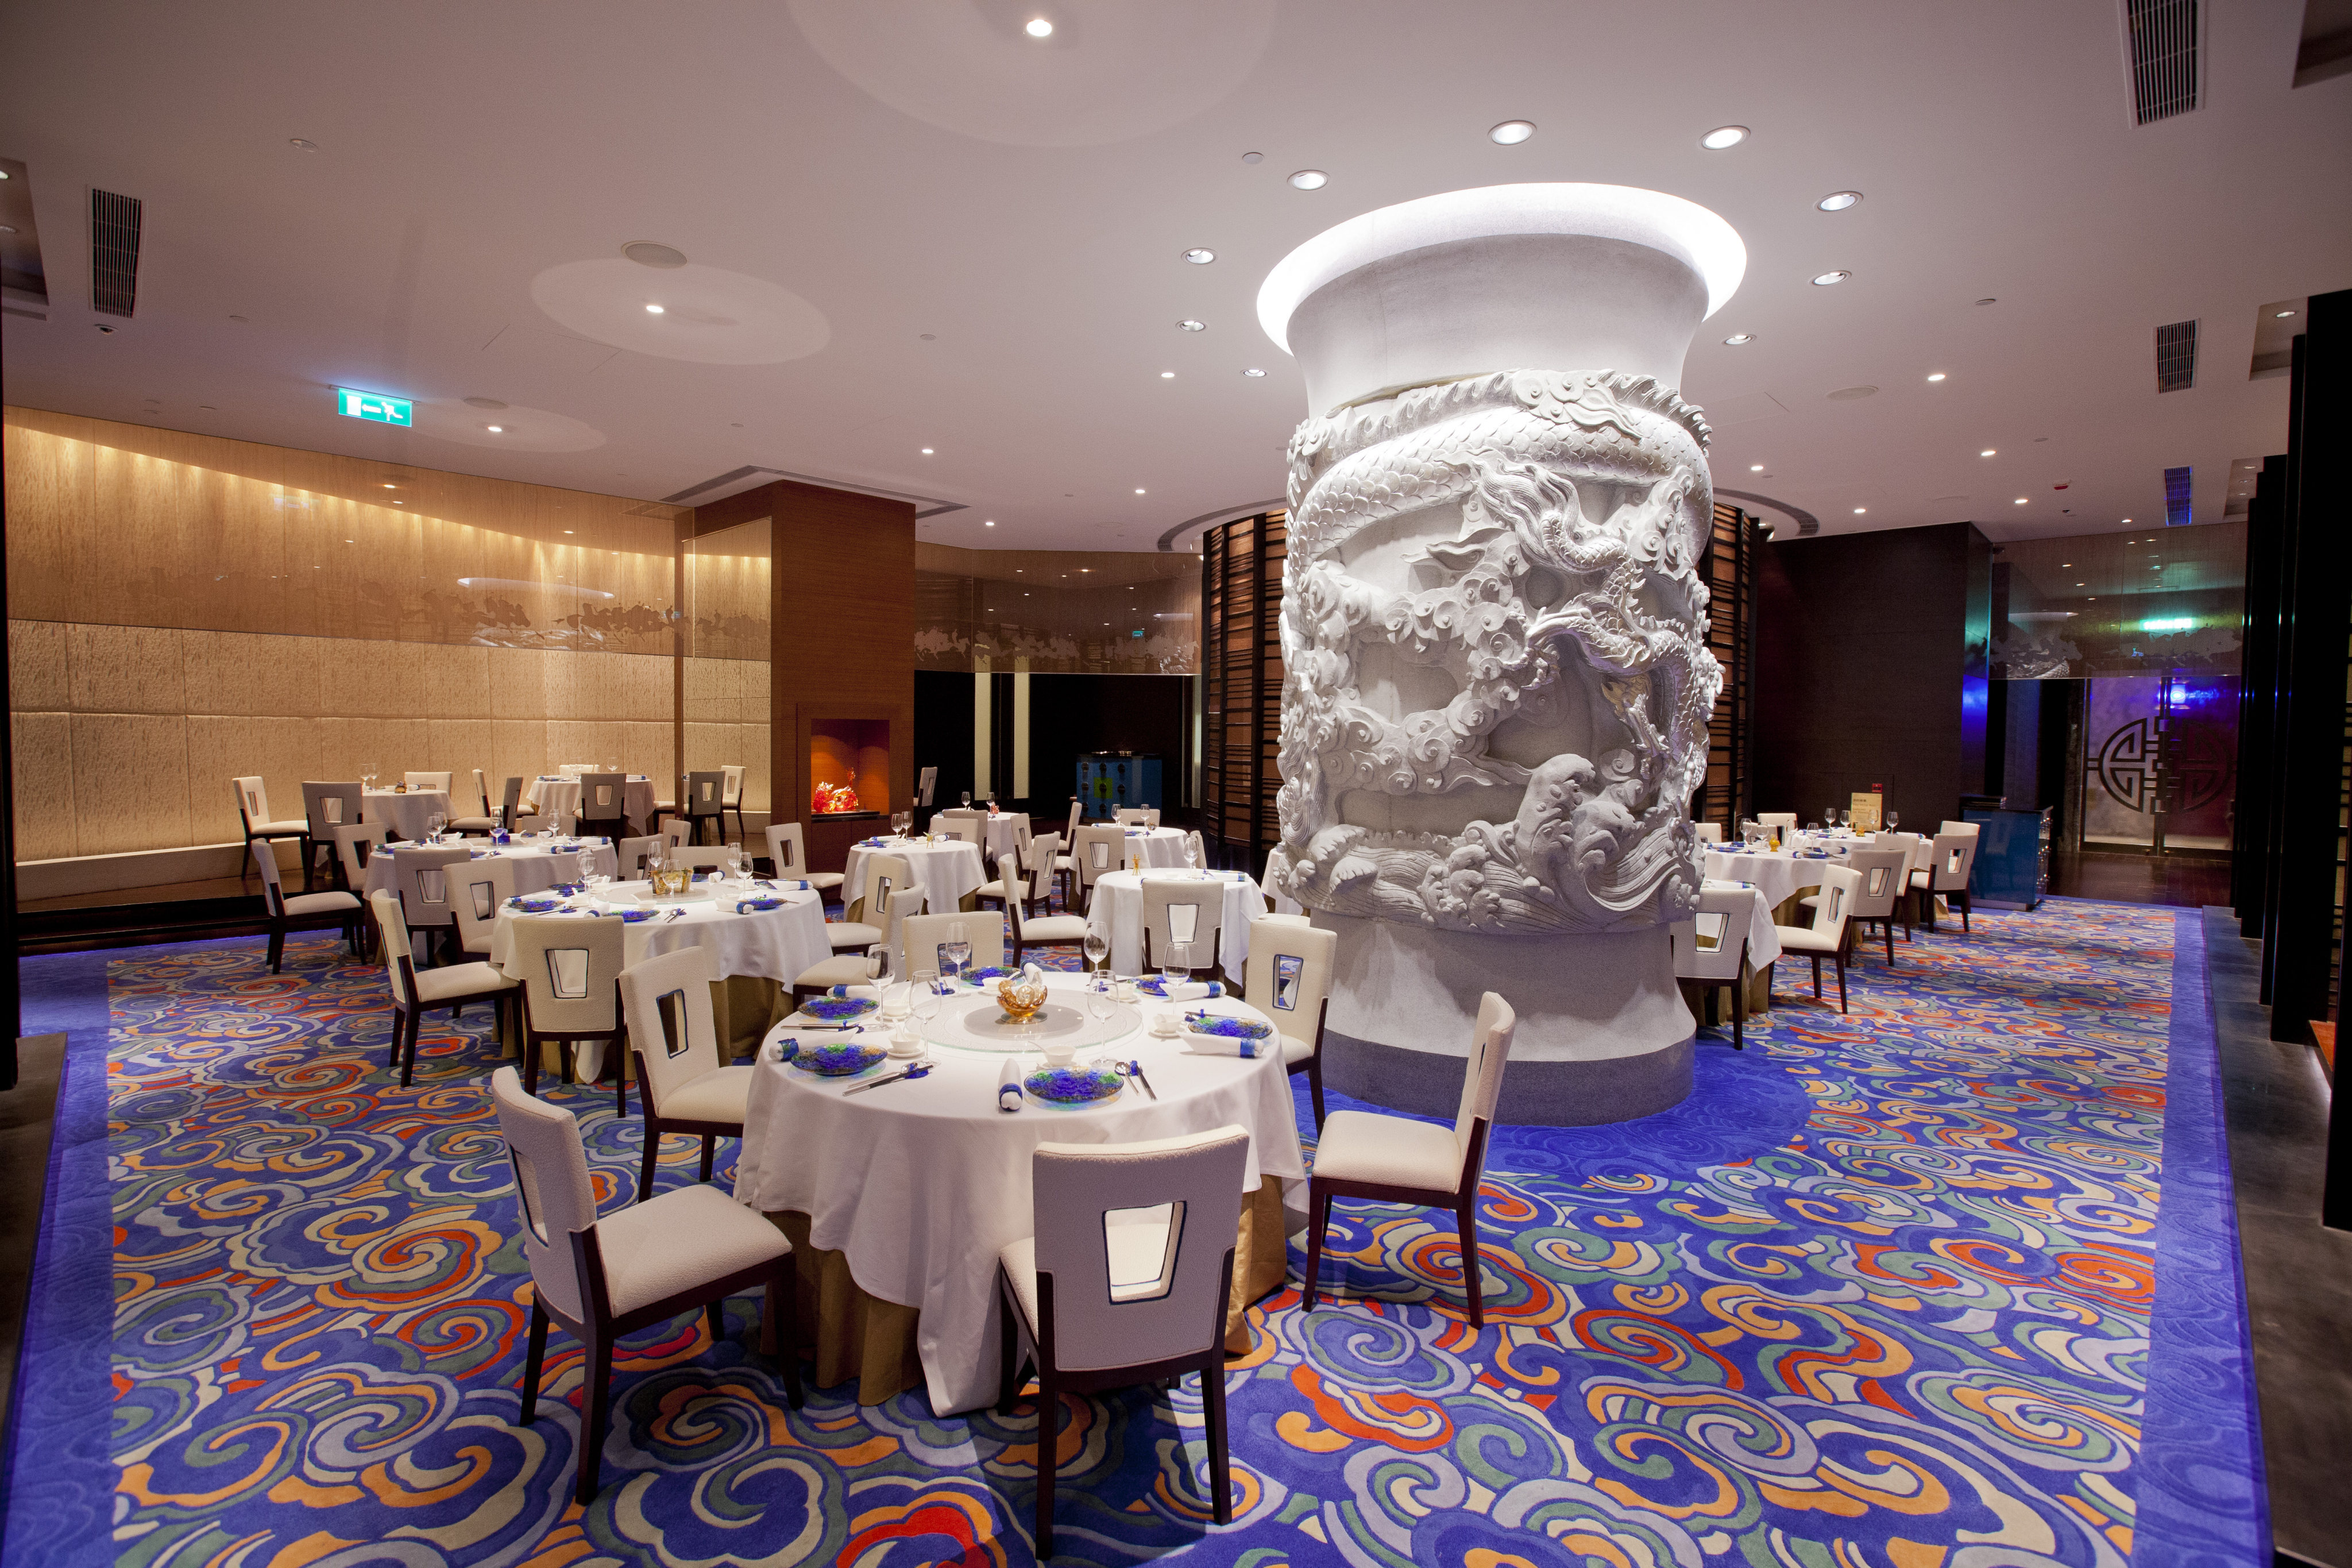 Imperial Court has an array of private dining rooms. Photo: Imperial Court